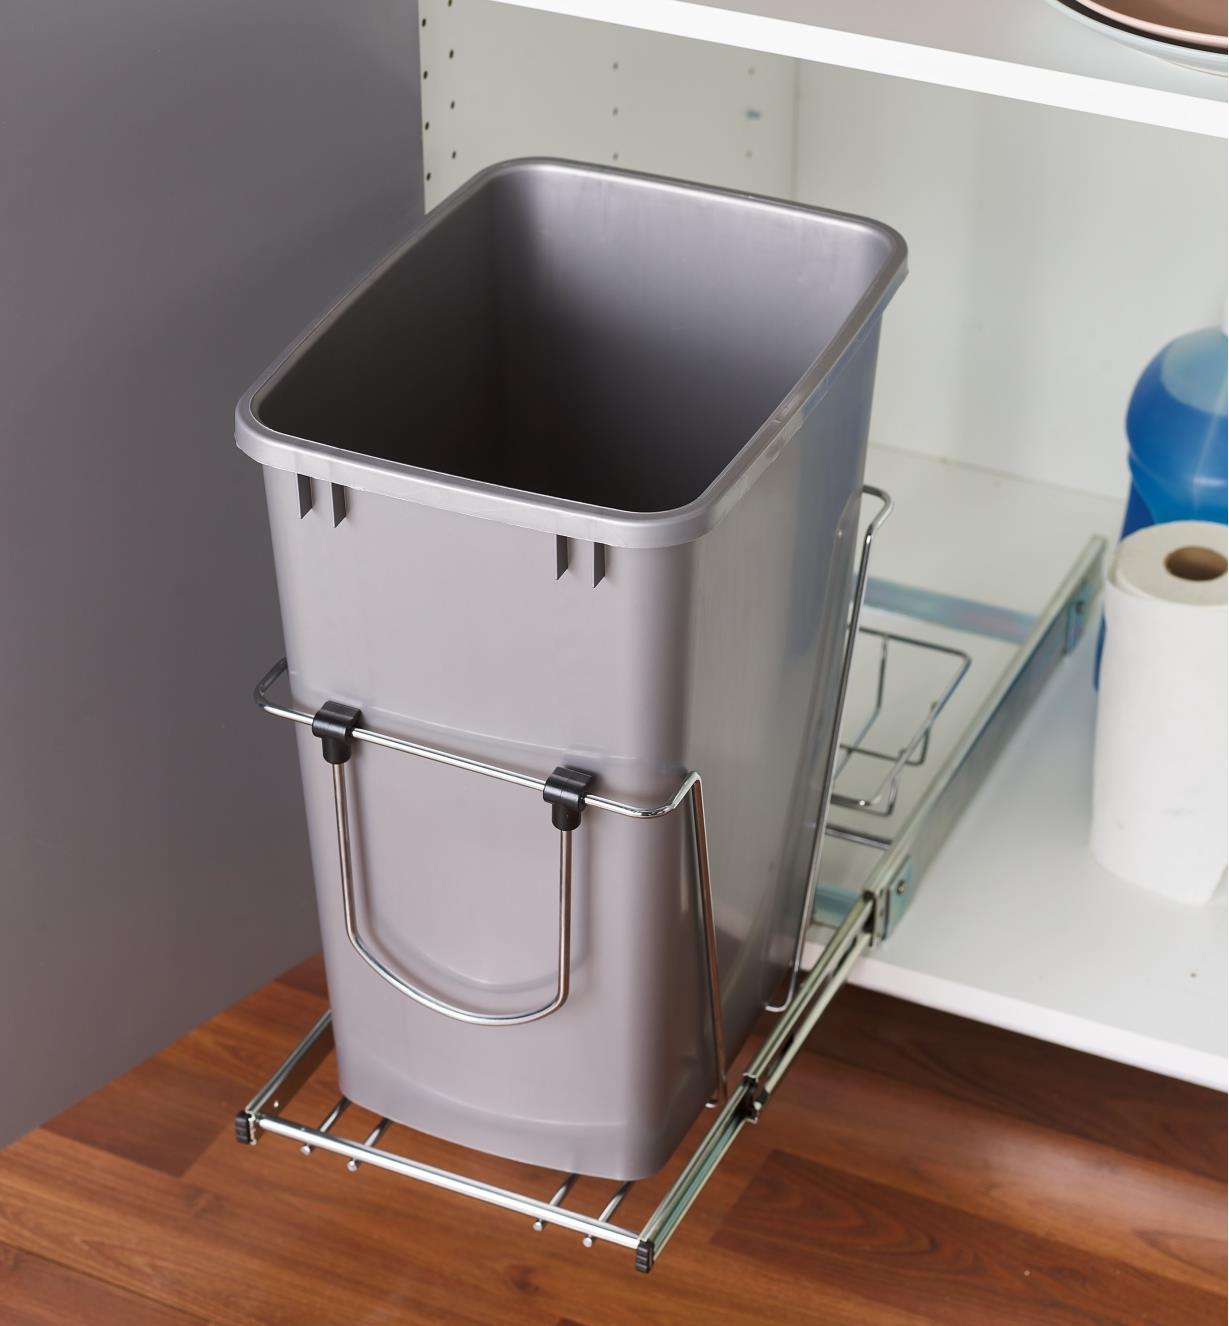 A rectangular plastic bin is secured on an extended slide in a cupboard